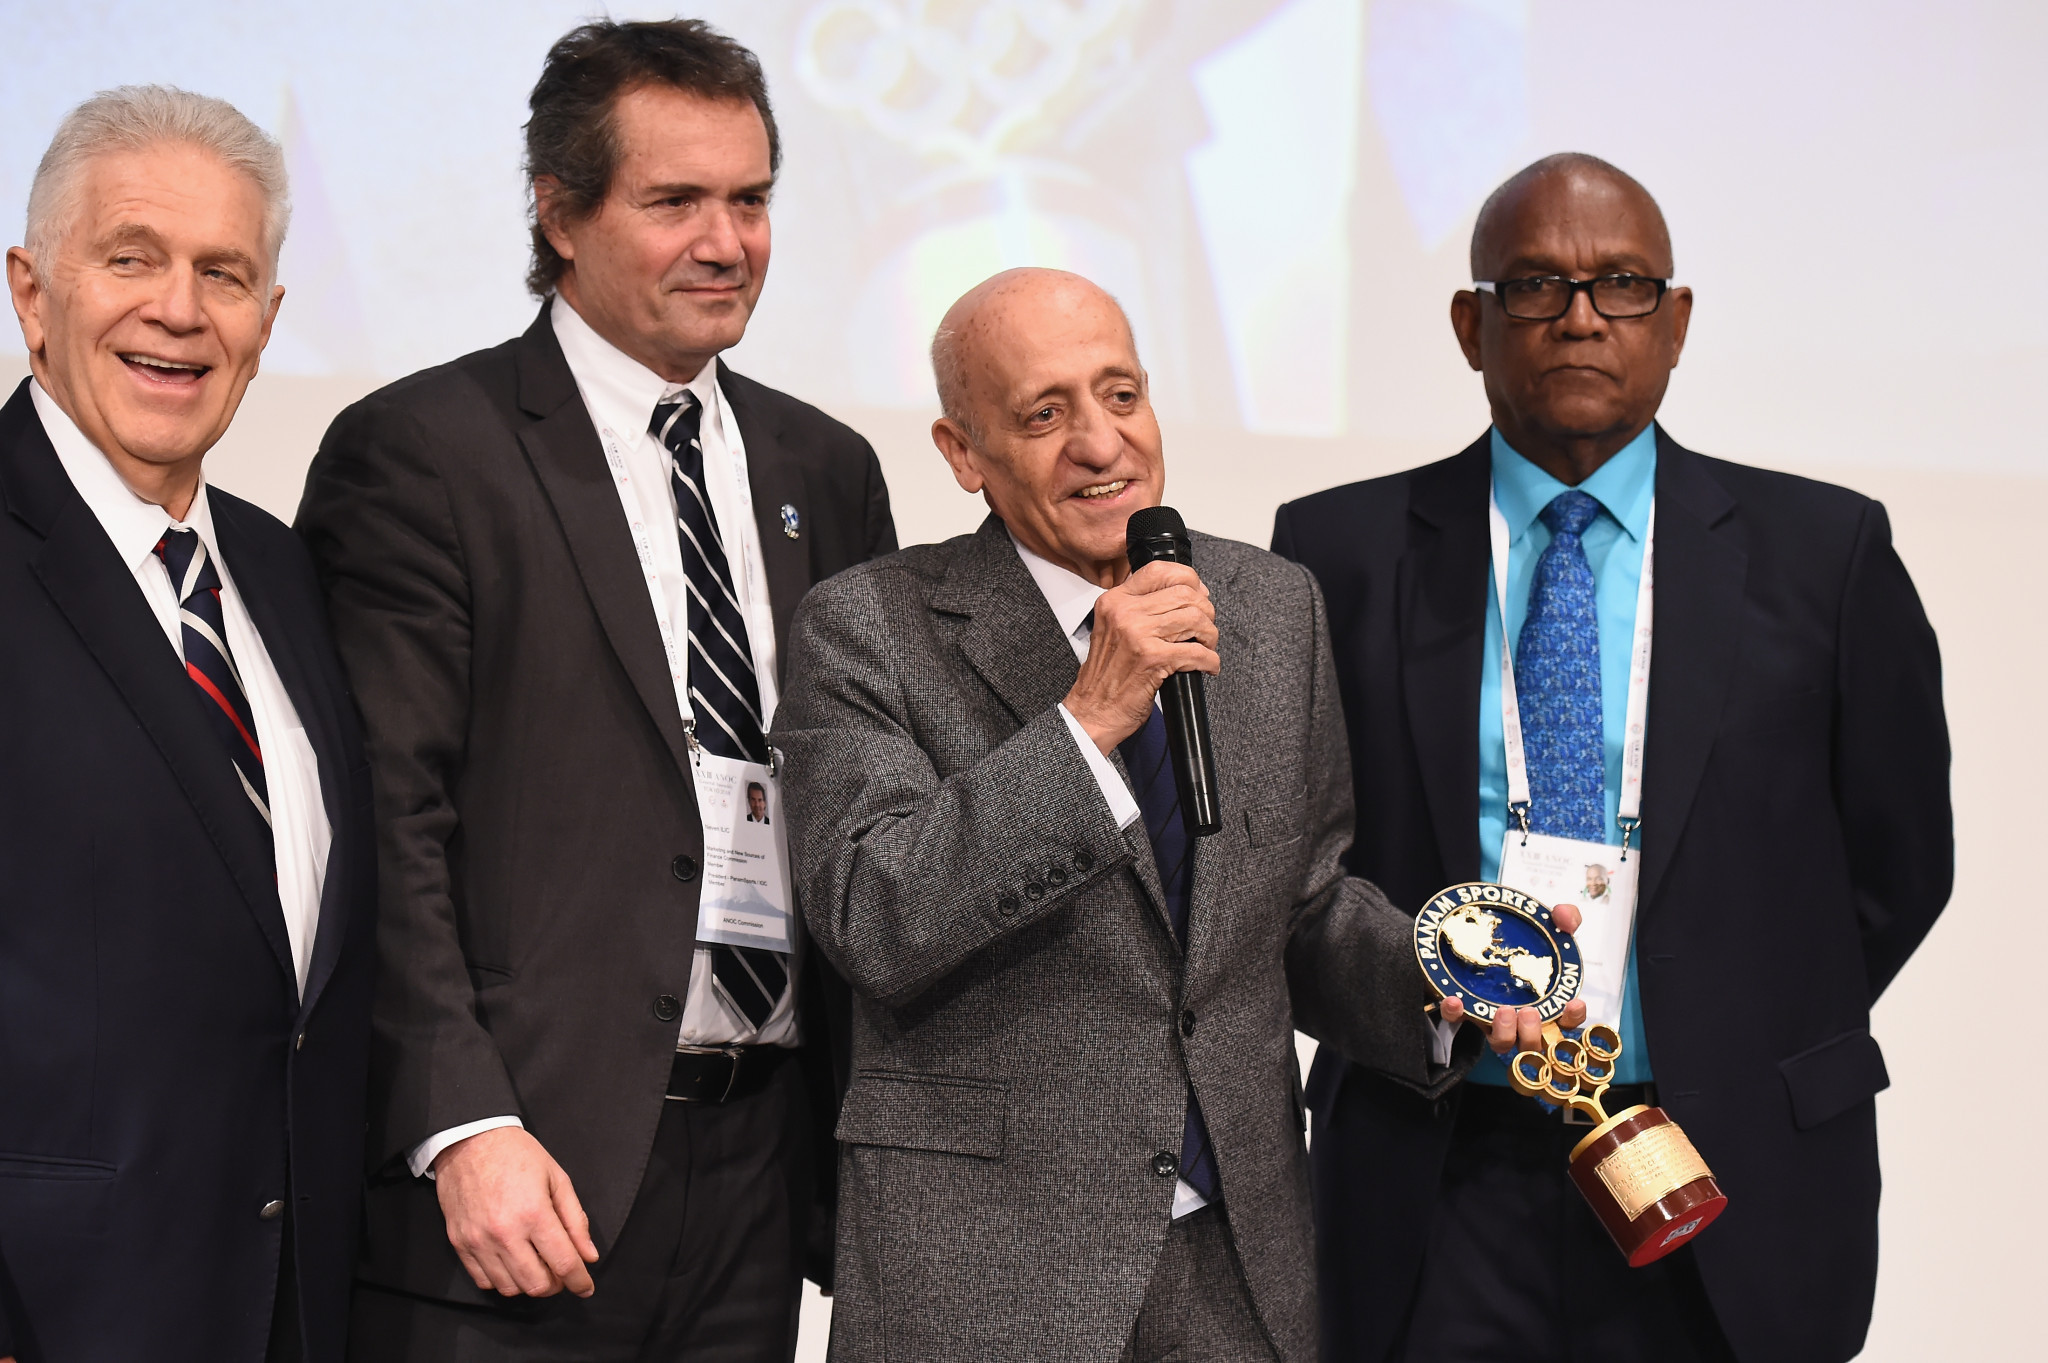 Panam Sports presented Julio Maglione with an award as he is set to be replaced as the body's vice-president ©Getty Images